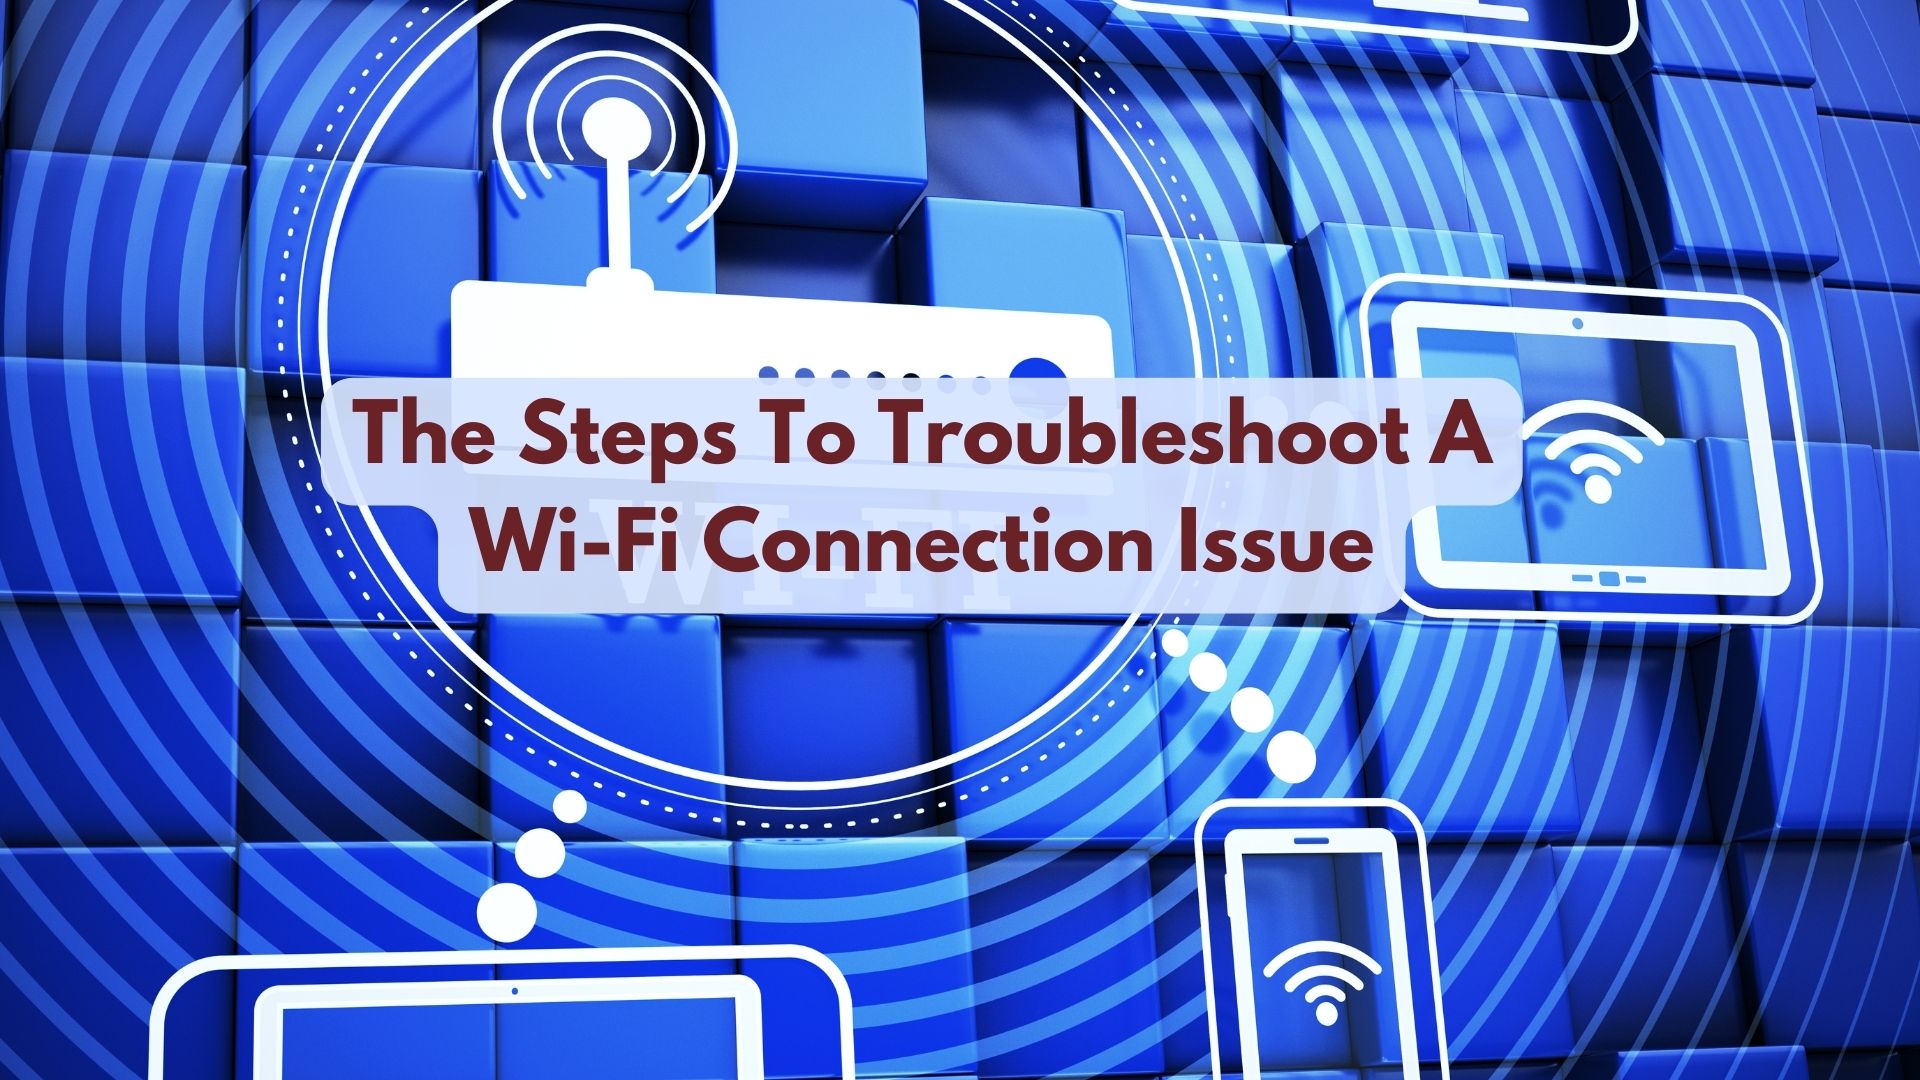 What Are The Steps To Troubleshoot A Wi-Fi Connection Issue?